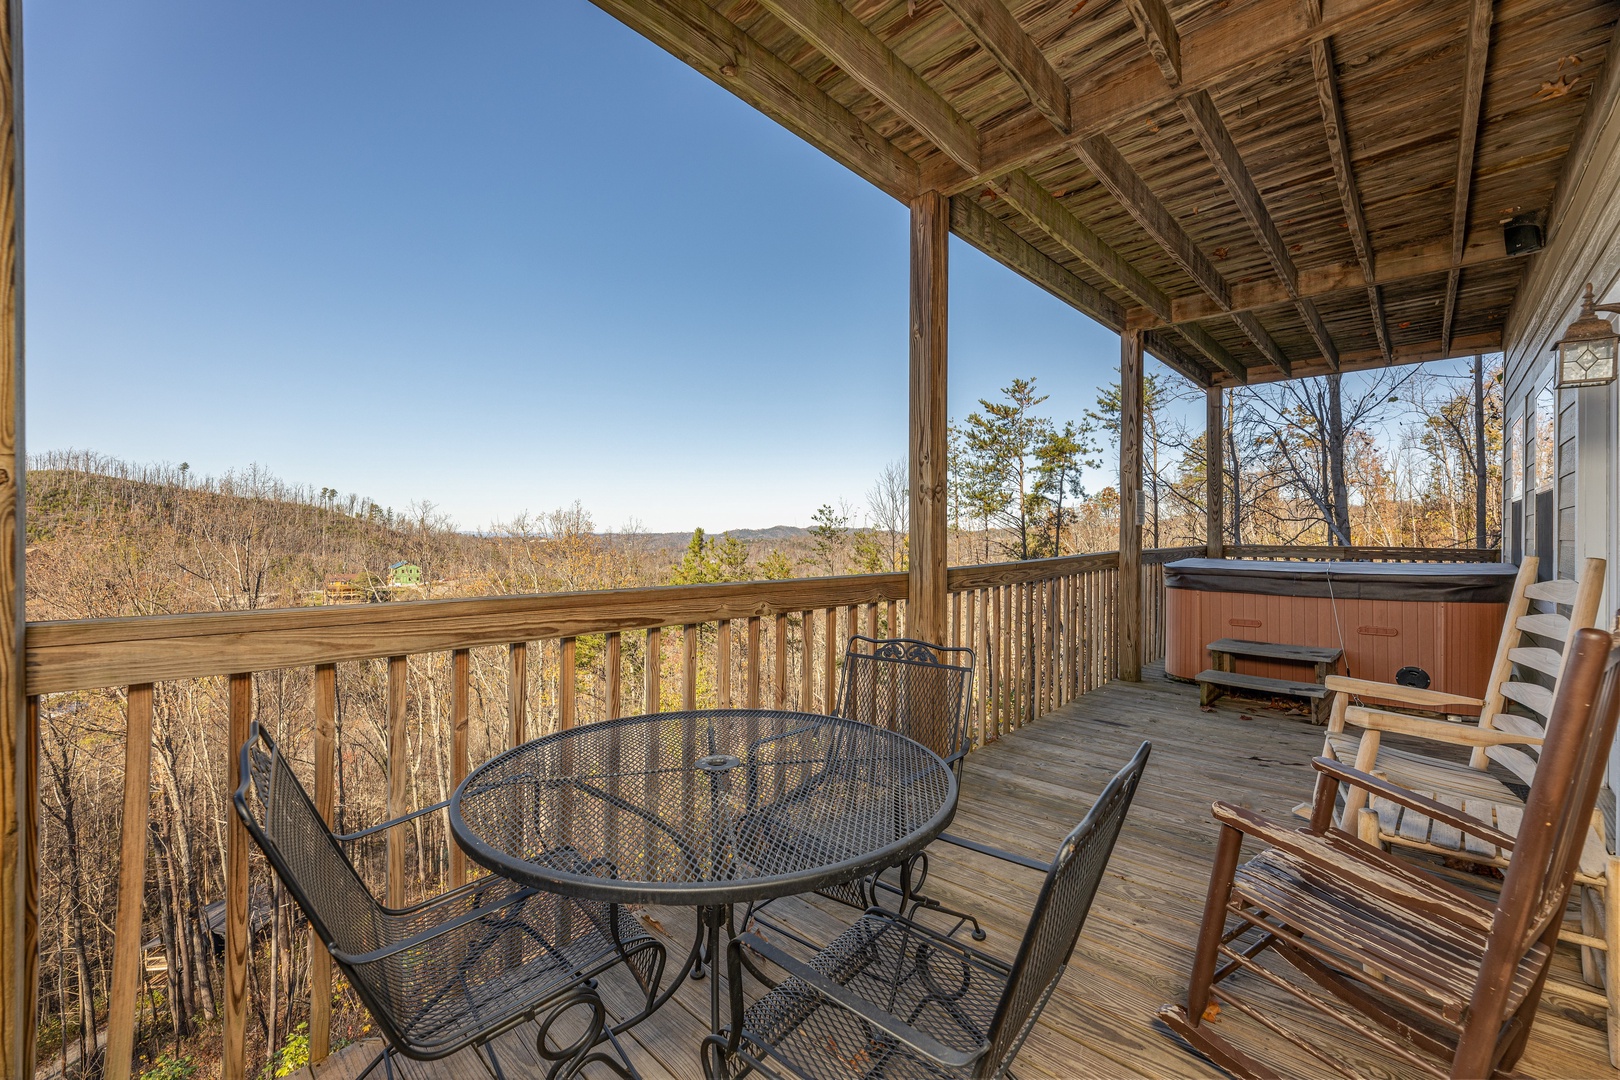 Table for three and hot tub on the deck at Le Bear Chalet, a 7 bedroom cabin rental located in Gatlinburg